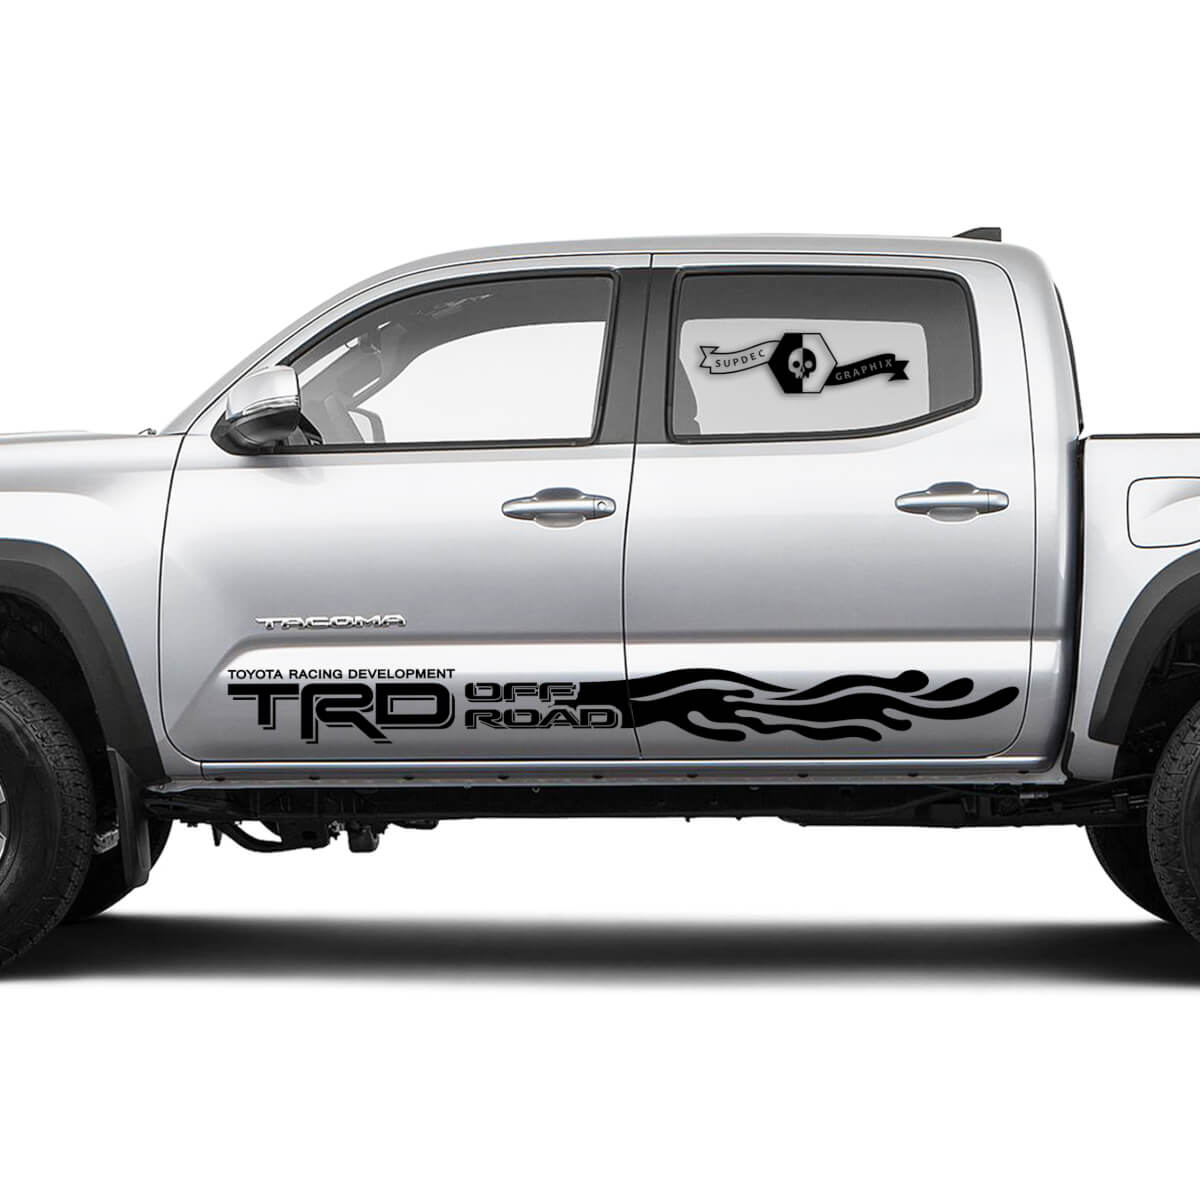 TRD Off Road TOYOTA Waves Drops stripes Decals Stickers for Tacoma Tundra 4Runner Hilux Doors